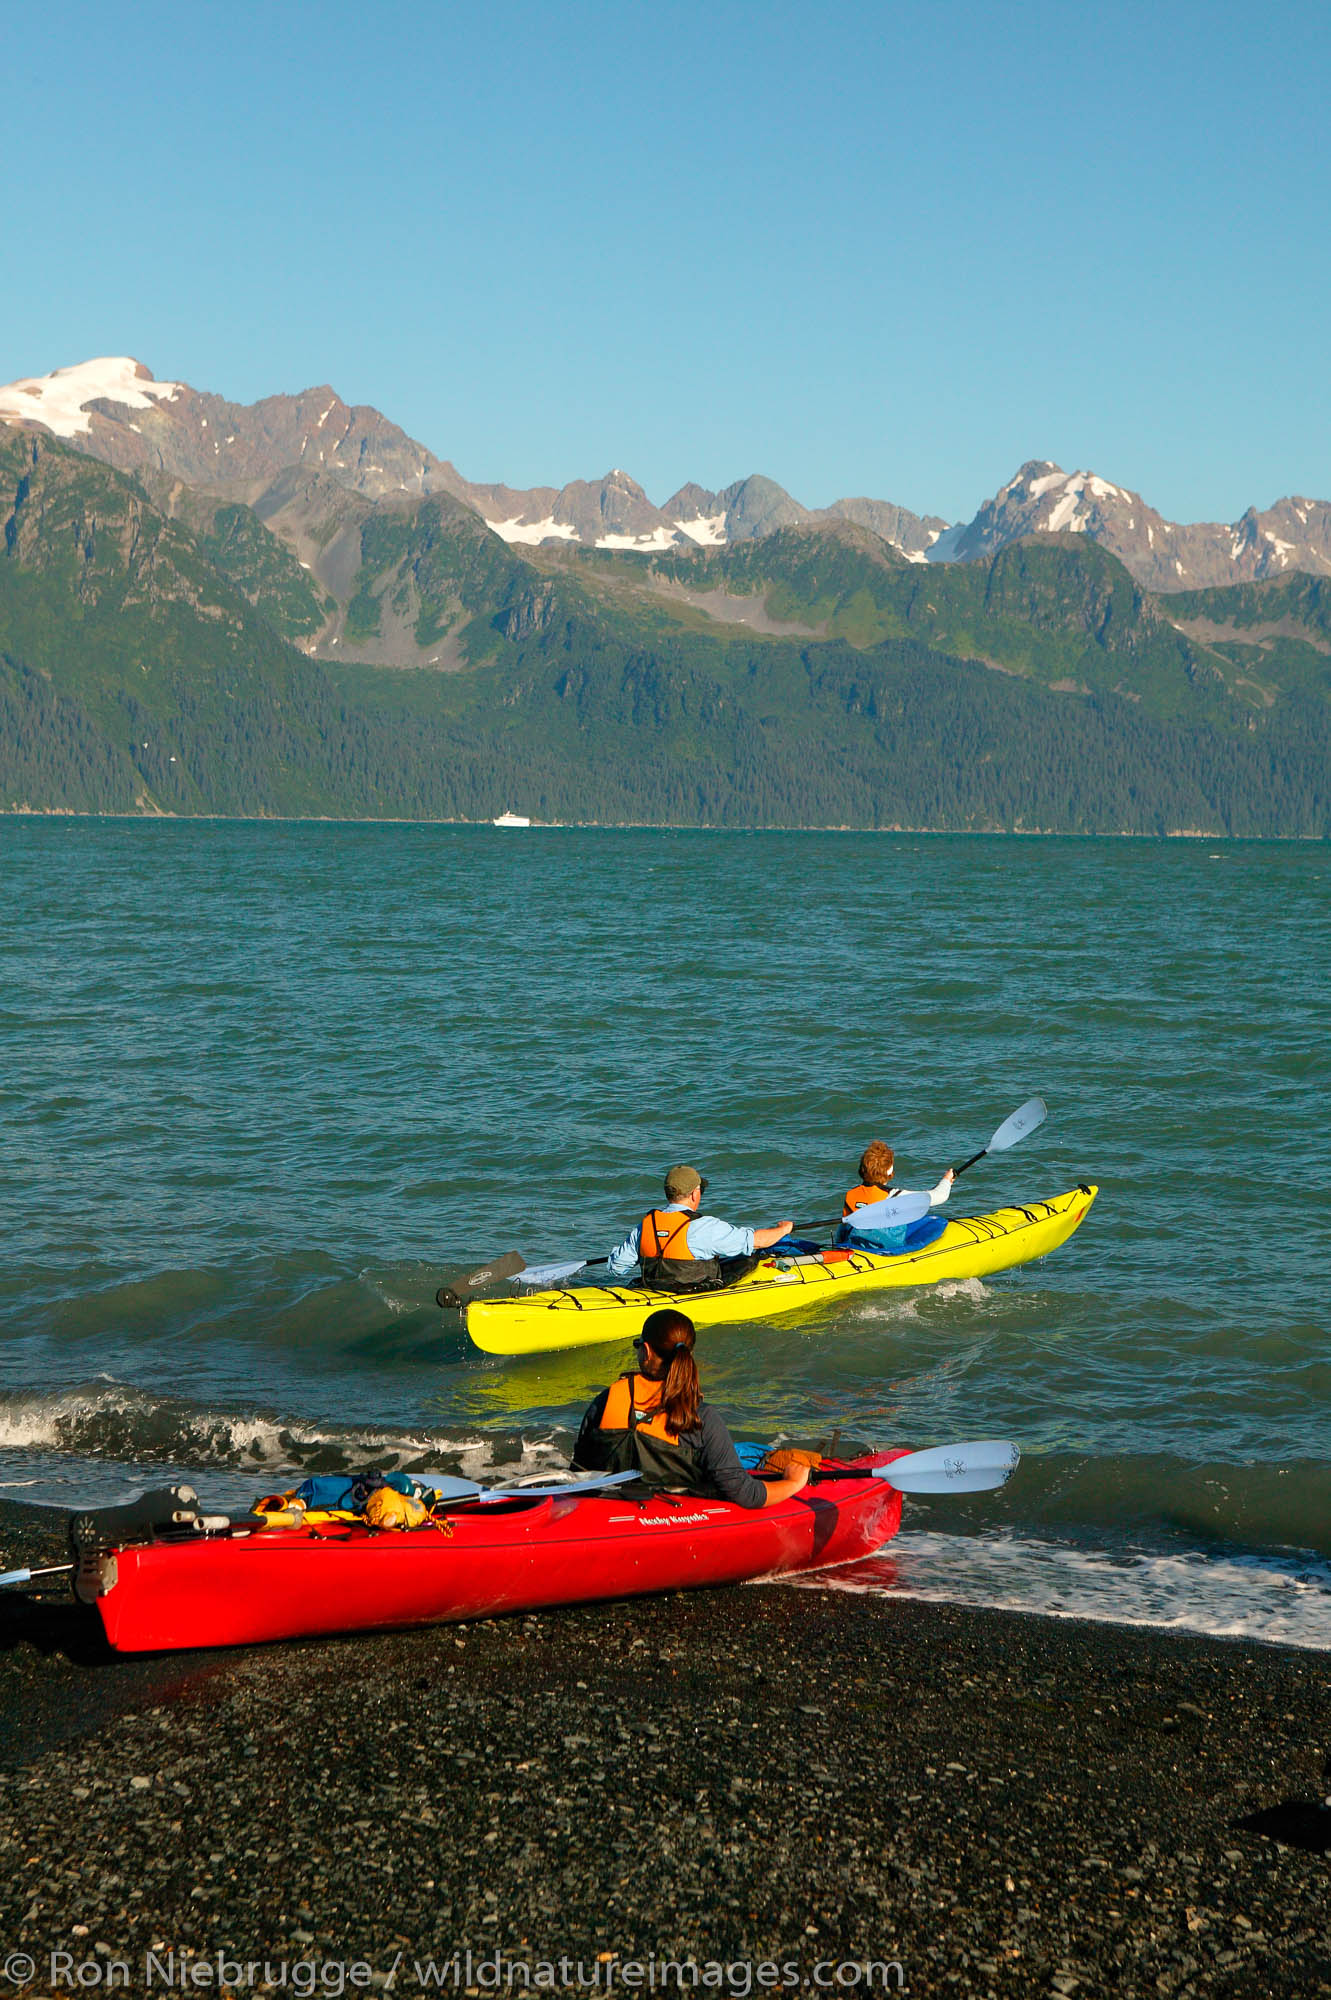 Kayaking on Resurrection Bay with the Chugach National Forest in the background, from Lowell Point, near Seward, Alaska.